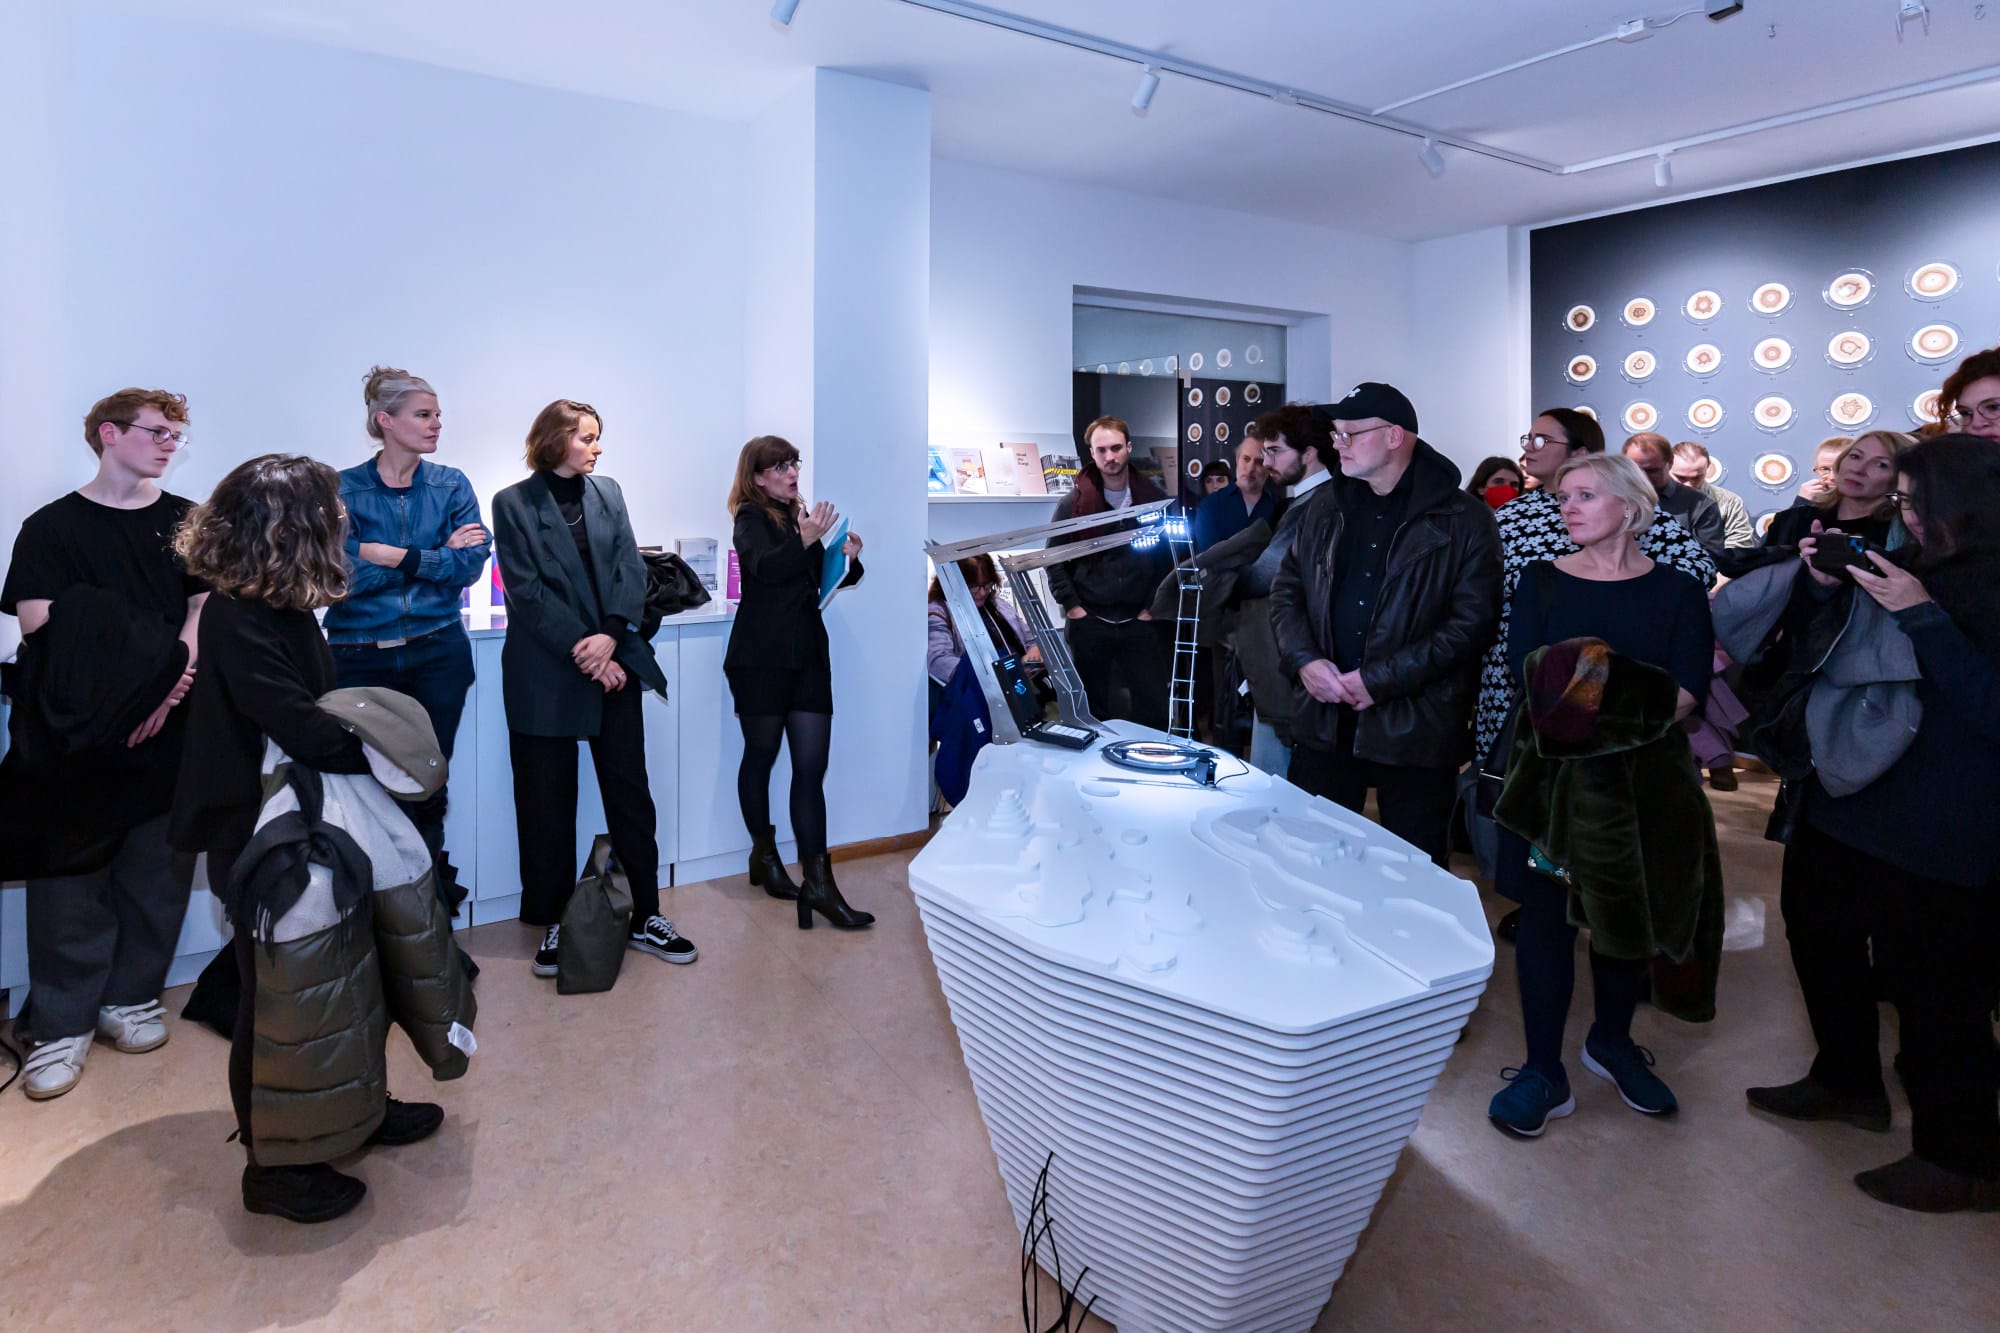 People listening to a curator speak at the opening of the exhibition